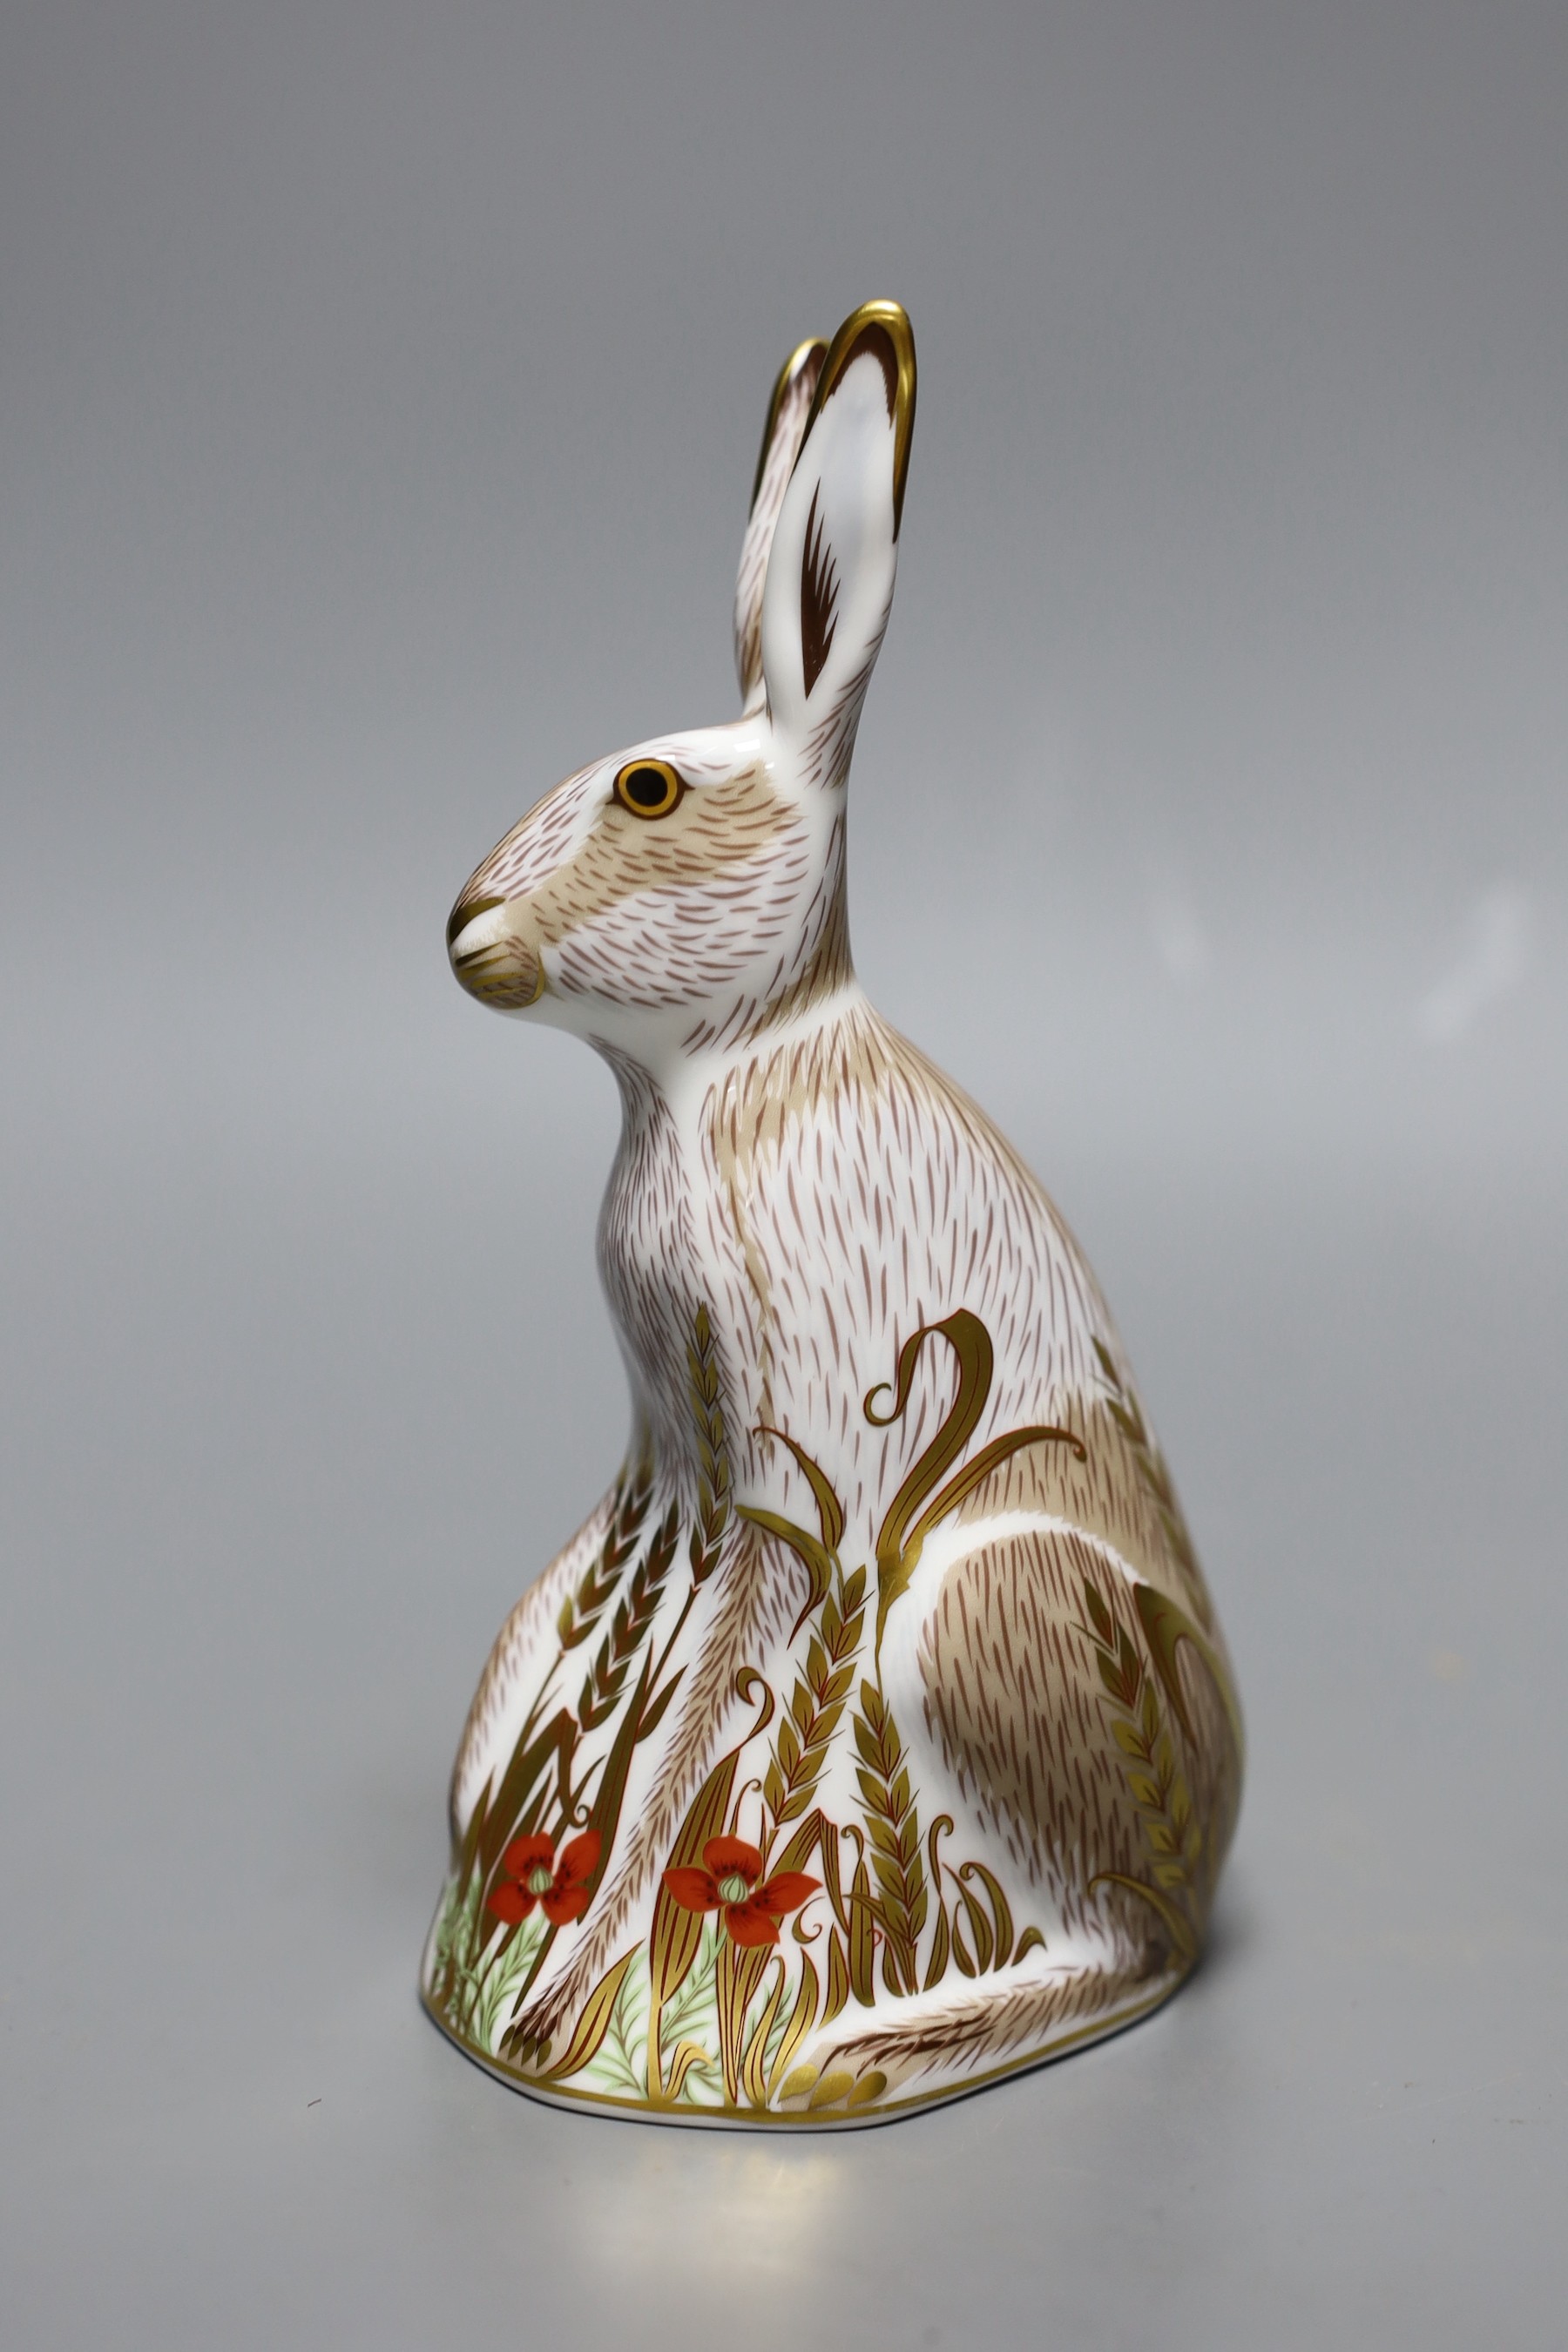 A Royal Crown Derby paperweight - Midsummer Hare, gold stopper, boxed, no certificate